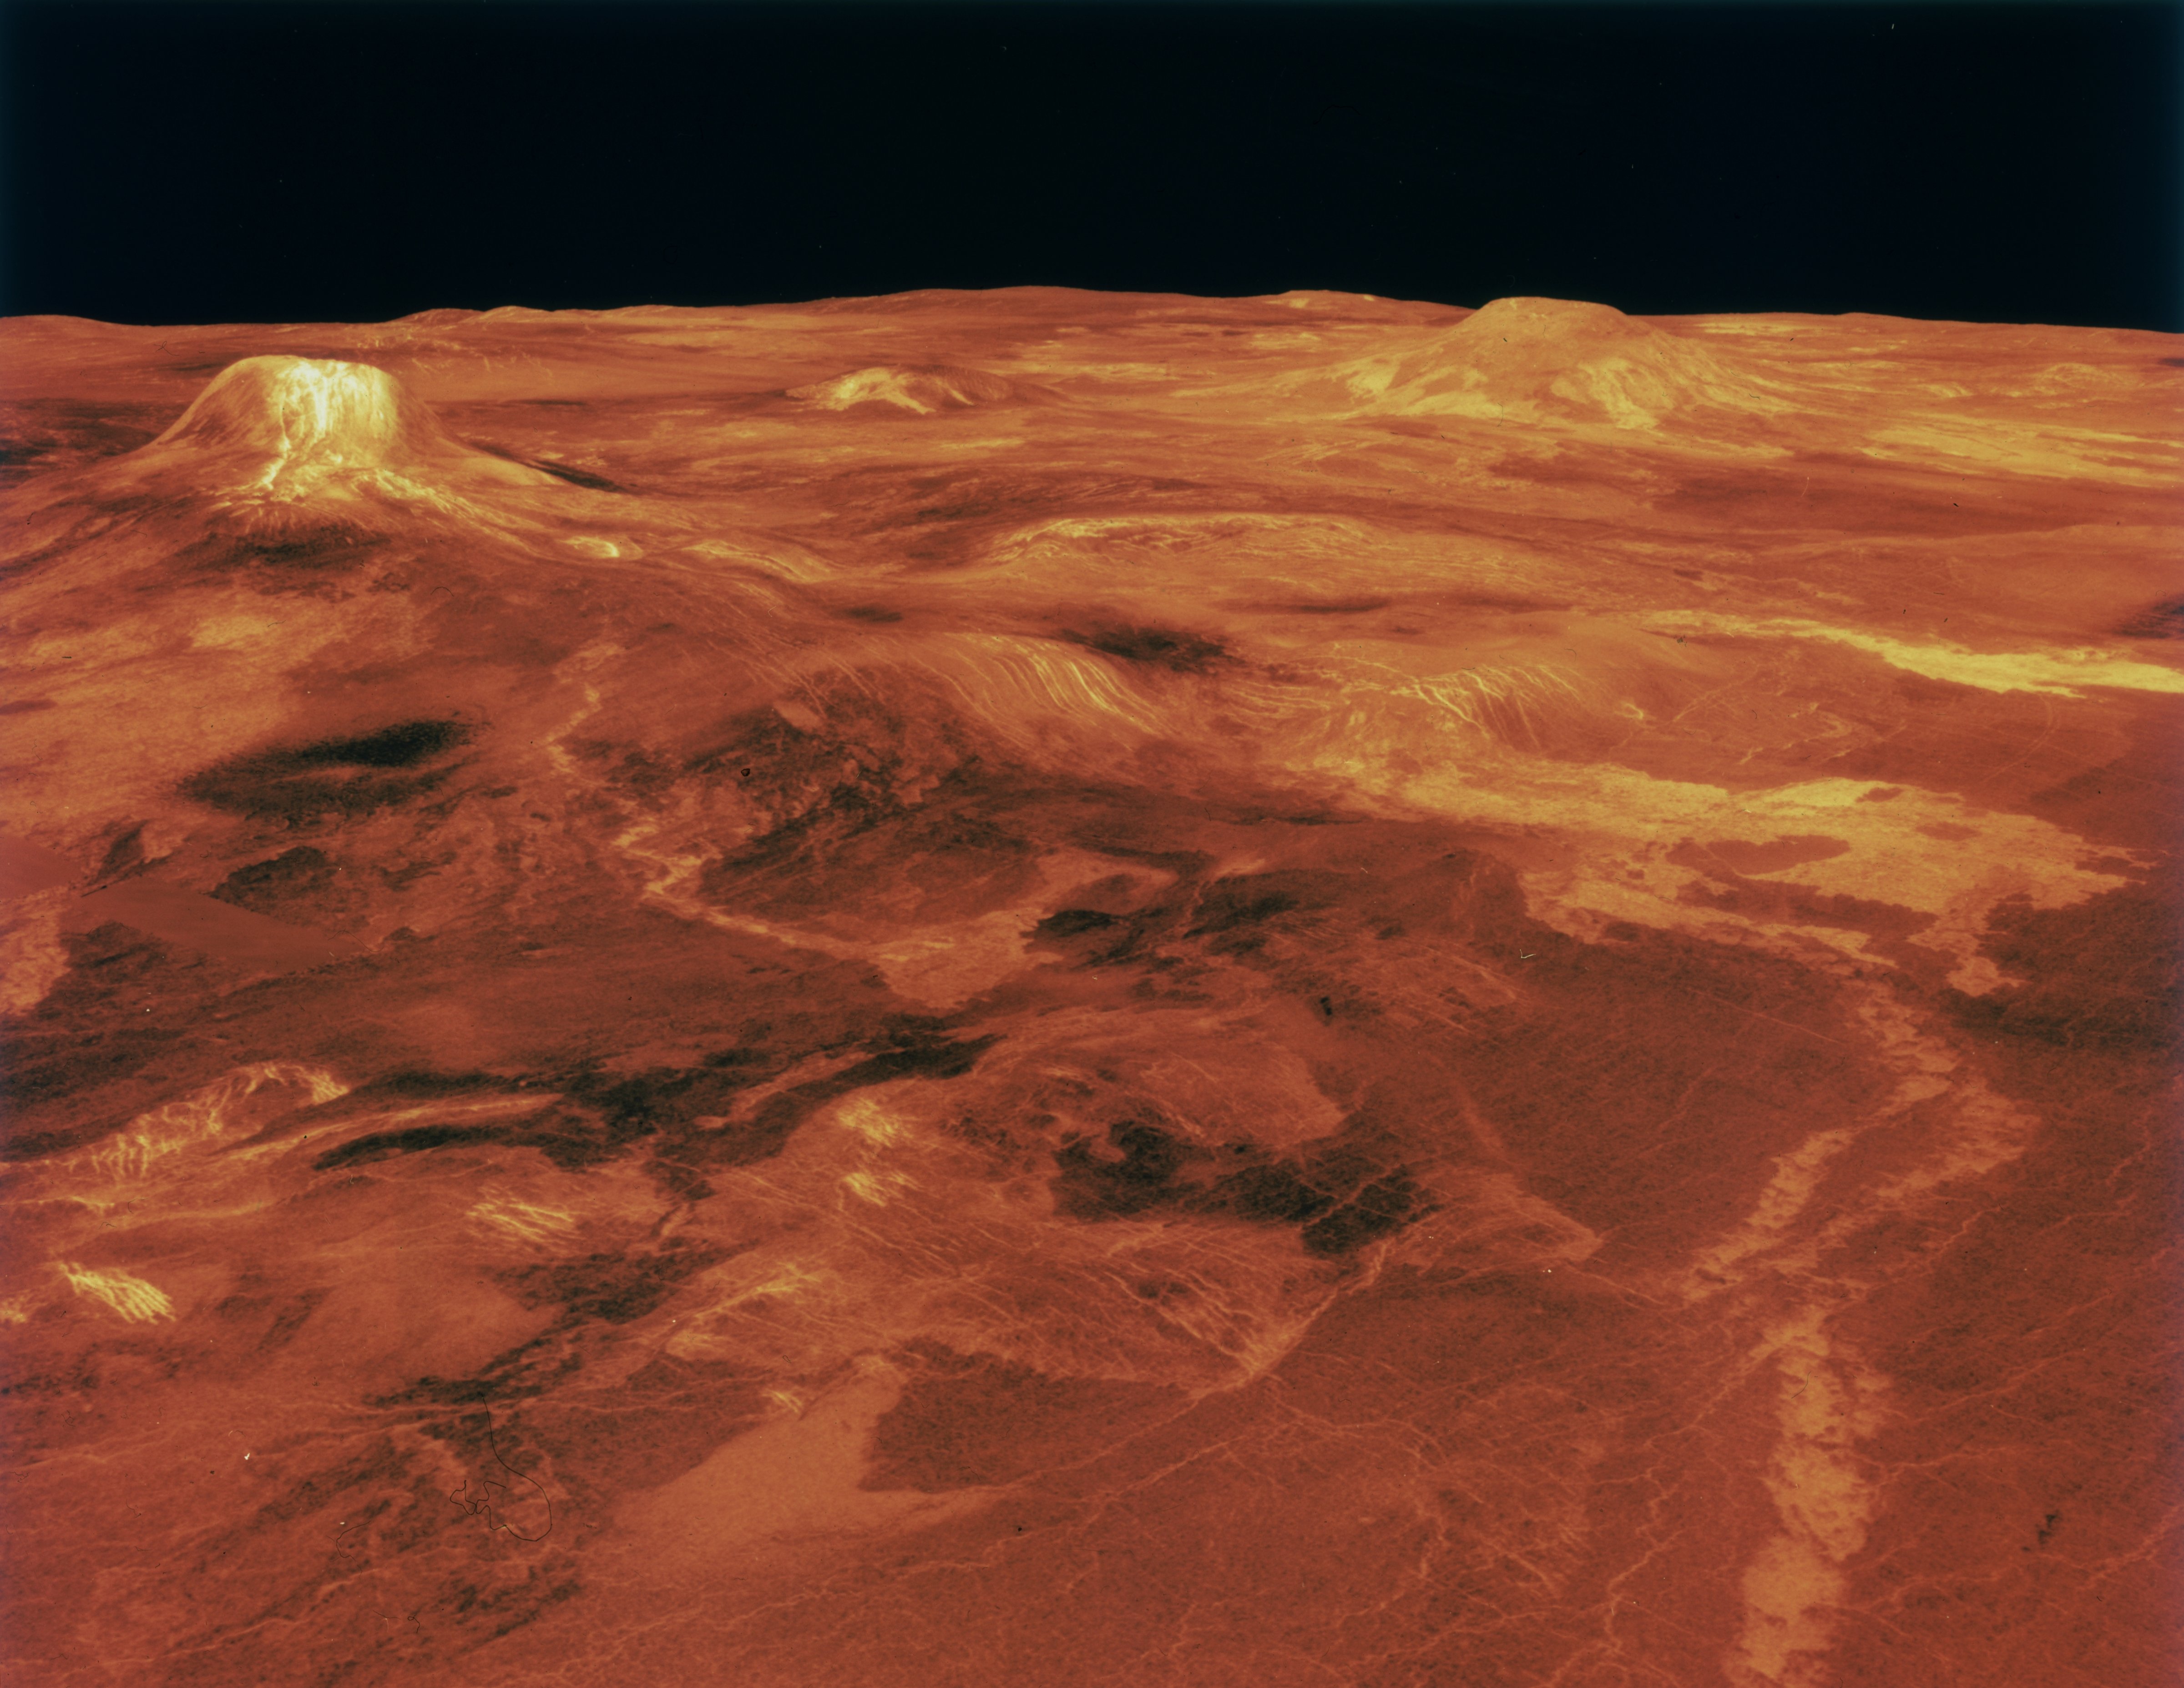 A computer simulation of the surface of the planet Venus, circa 1990. (Space Frontiers&mdash;Getty Images)